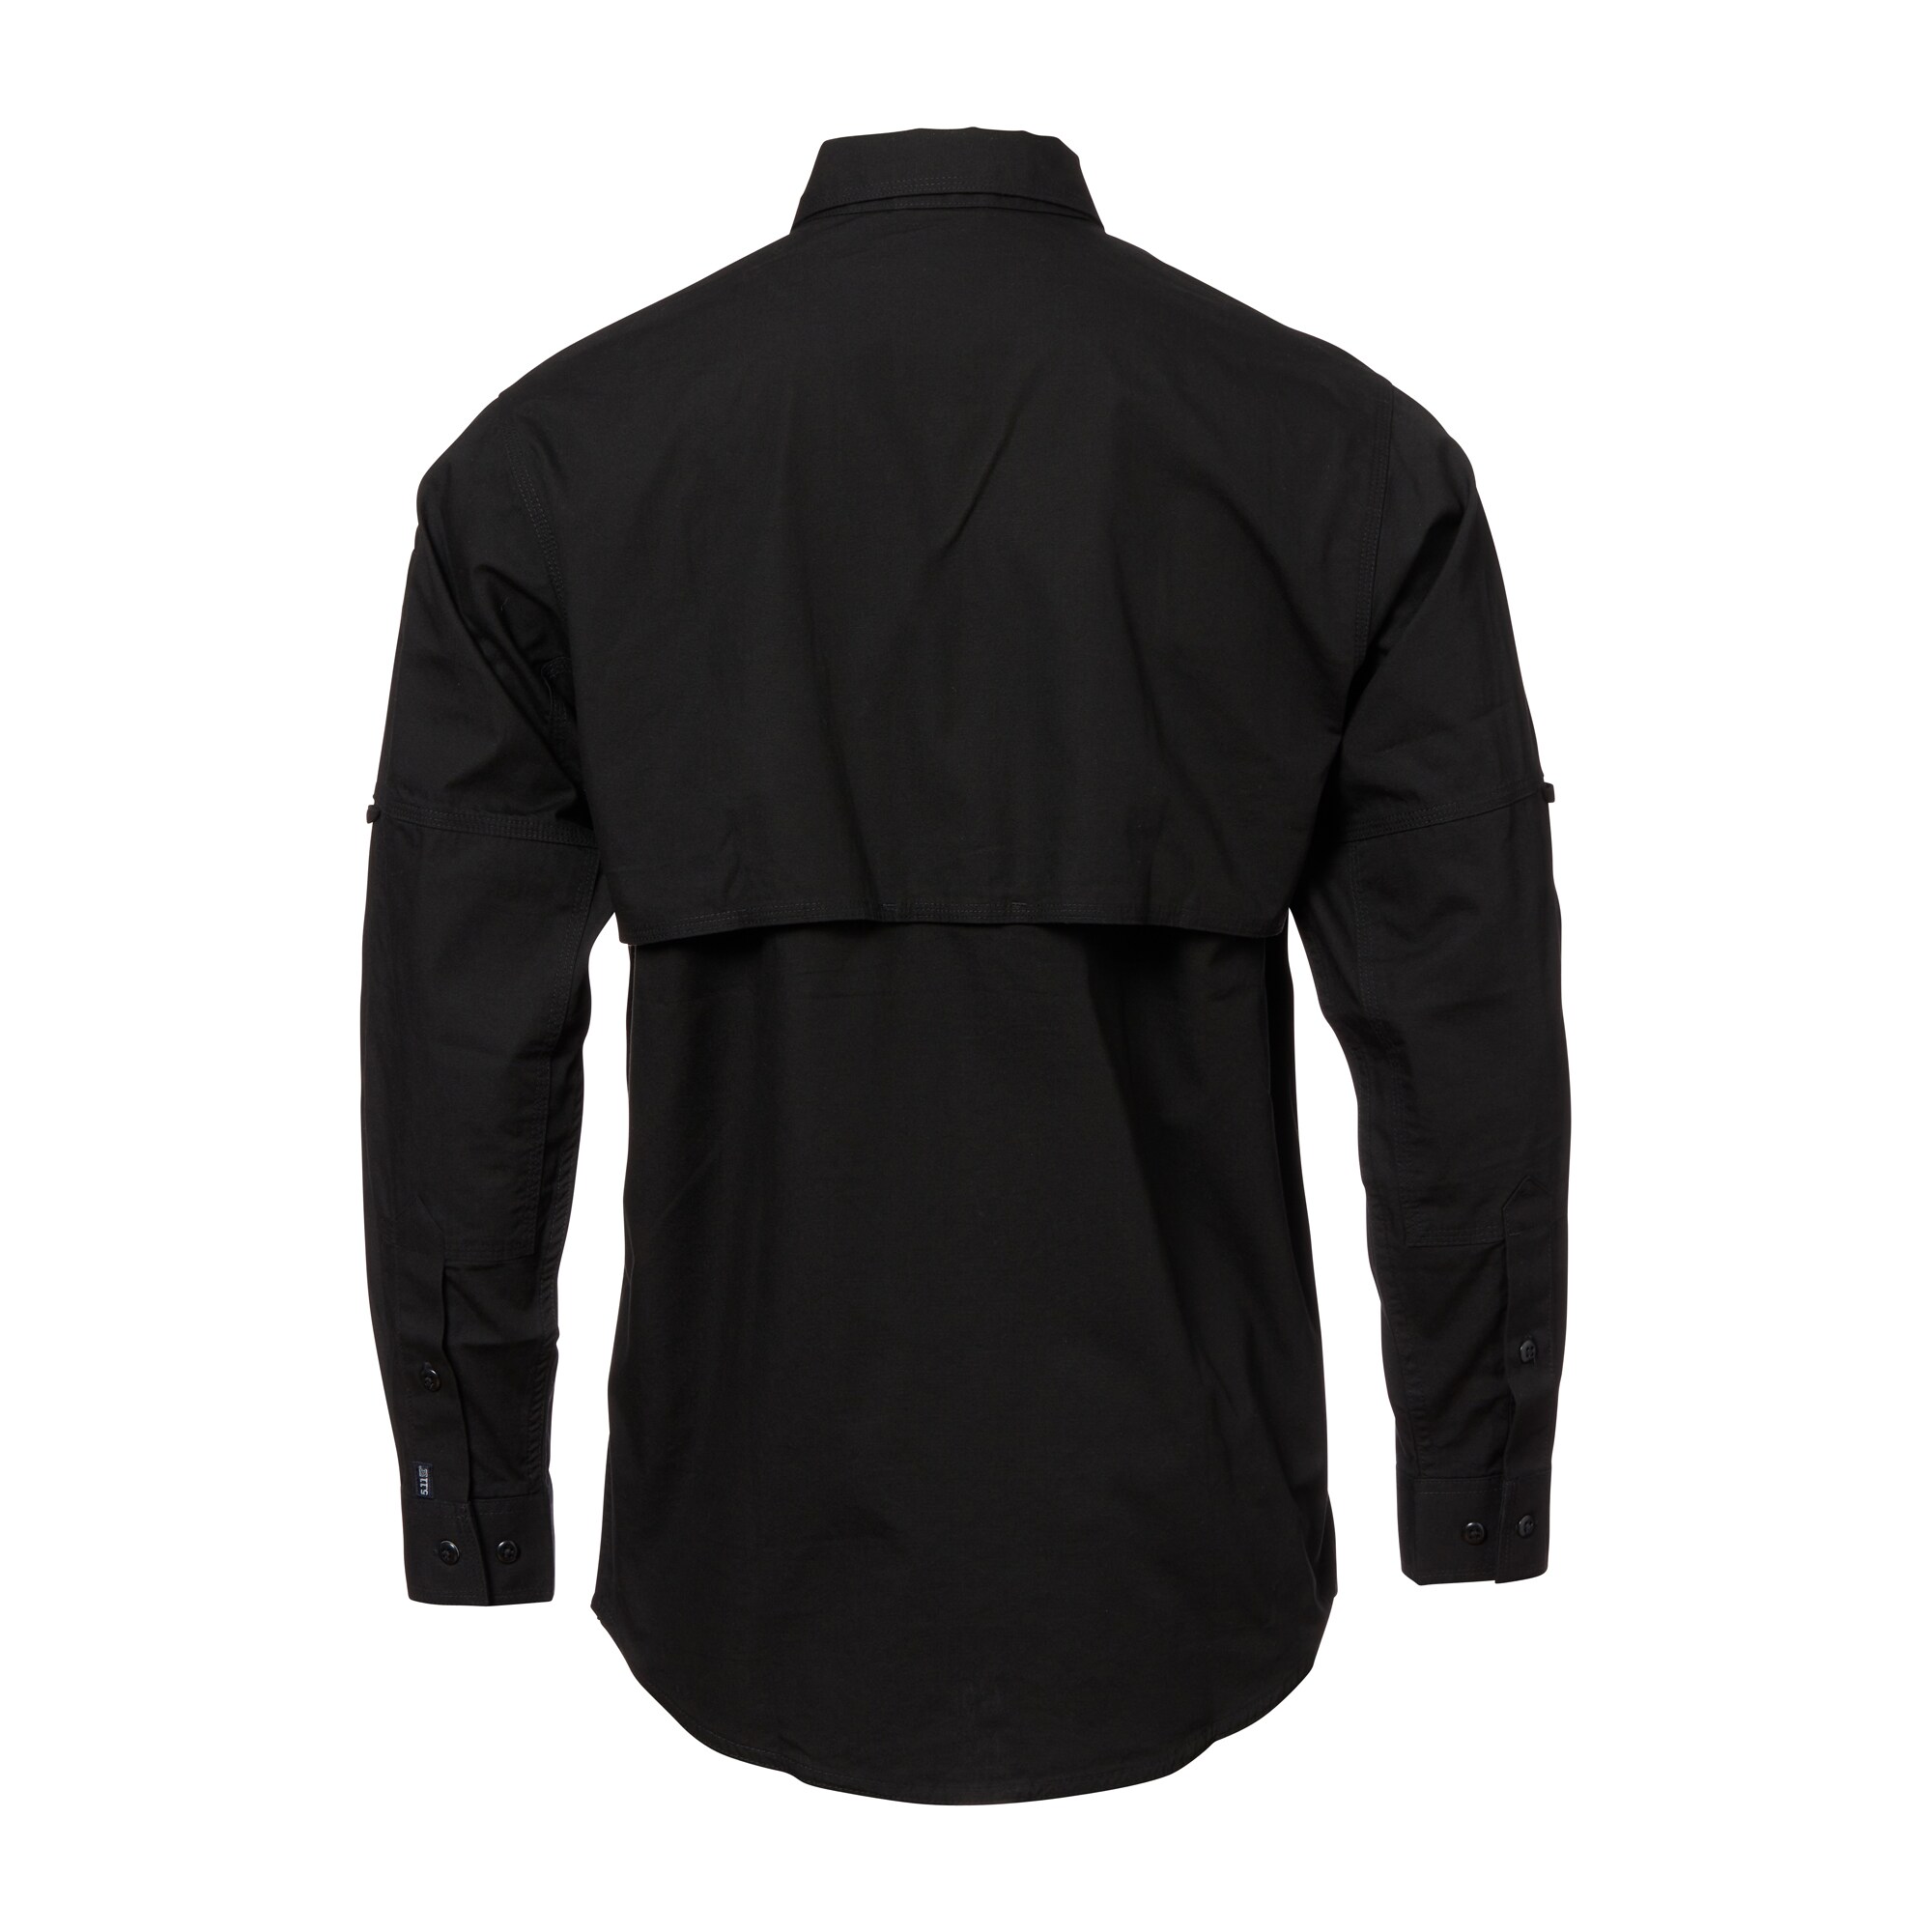 Purchase the 5.11 Tactical Shirt Long Sleeve Cotton black by ASM